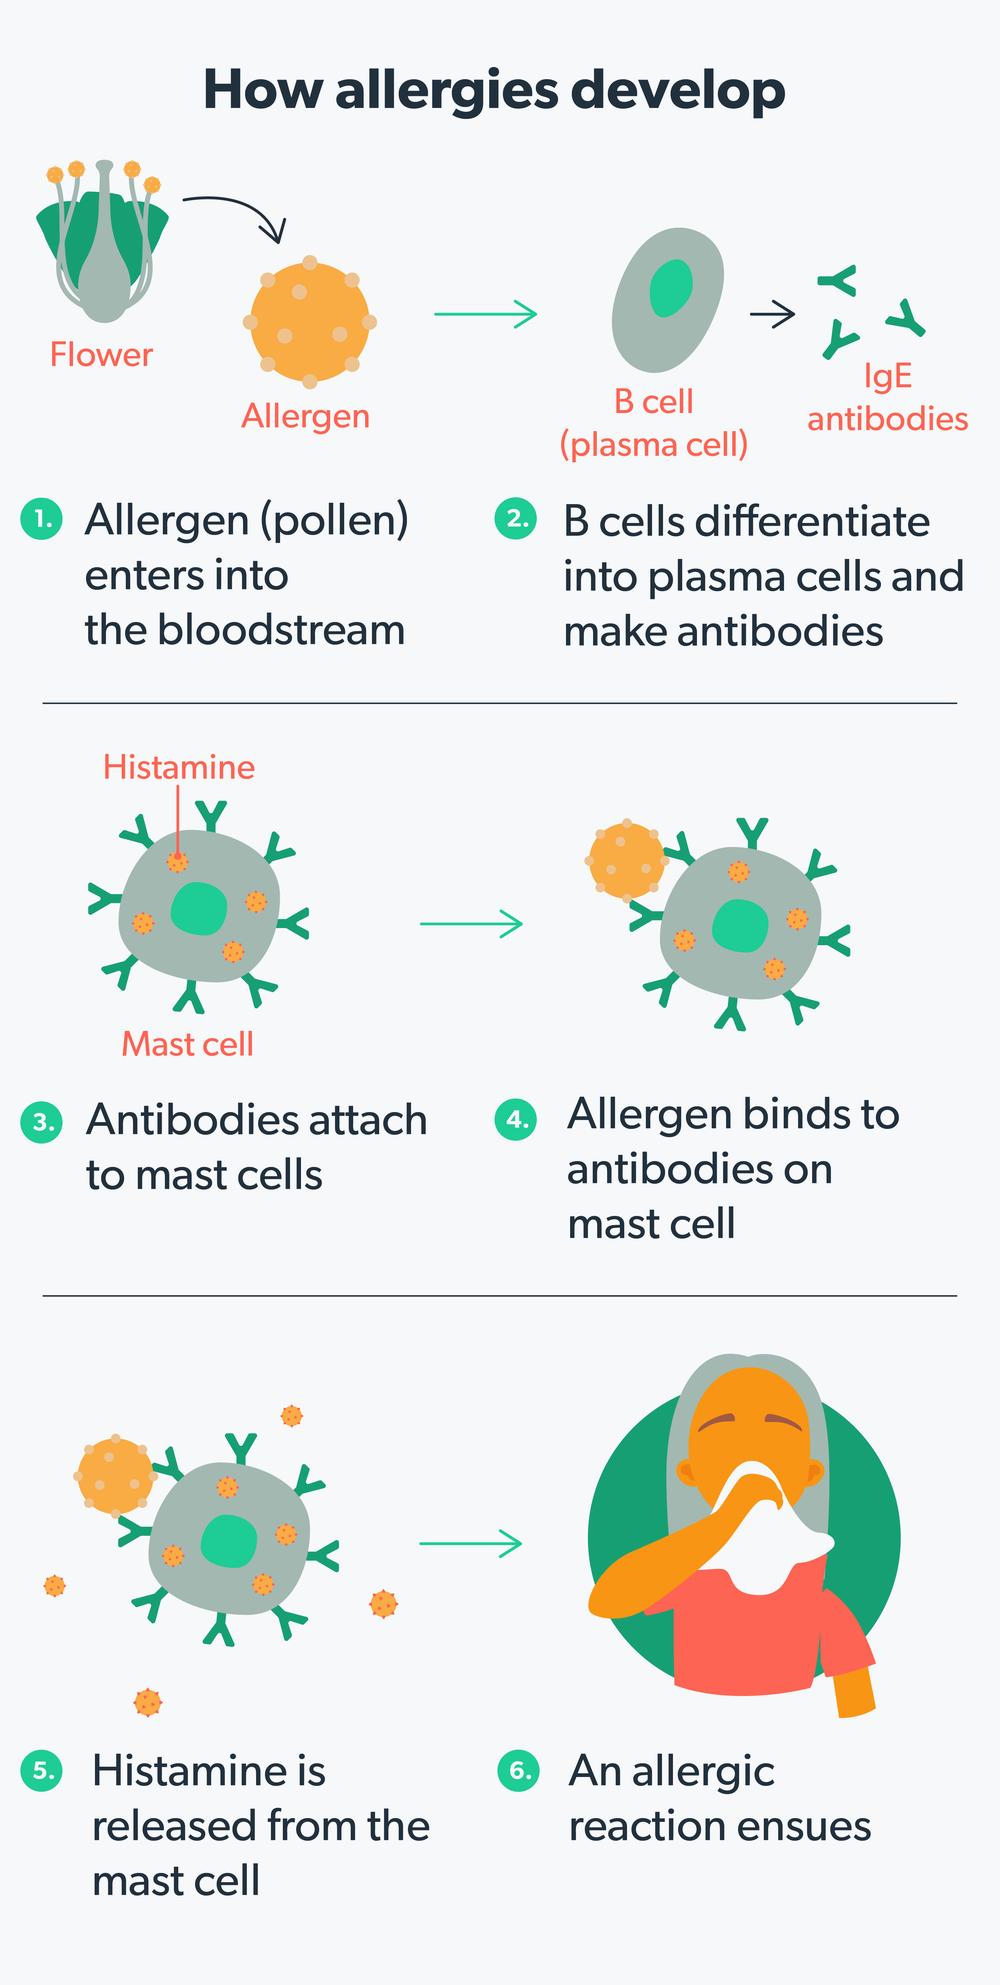 The image describes the process of how allergies develop, from the allergen entering the bloodstream to the release of histamine and the ensuing allergic reaction.